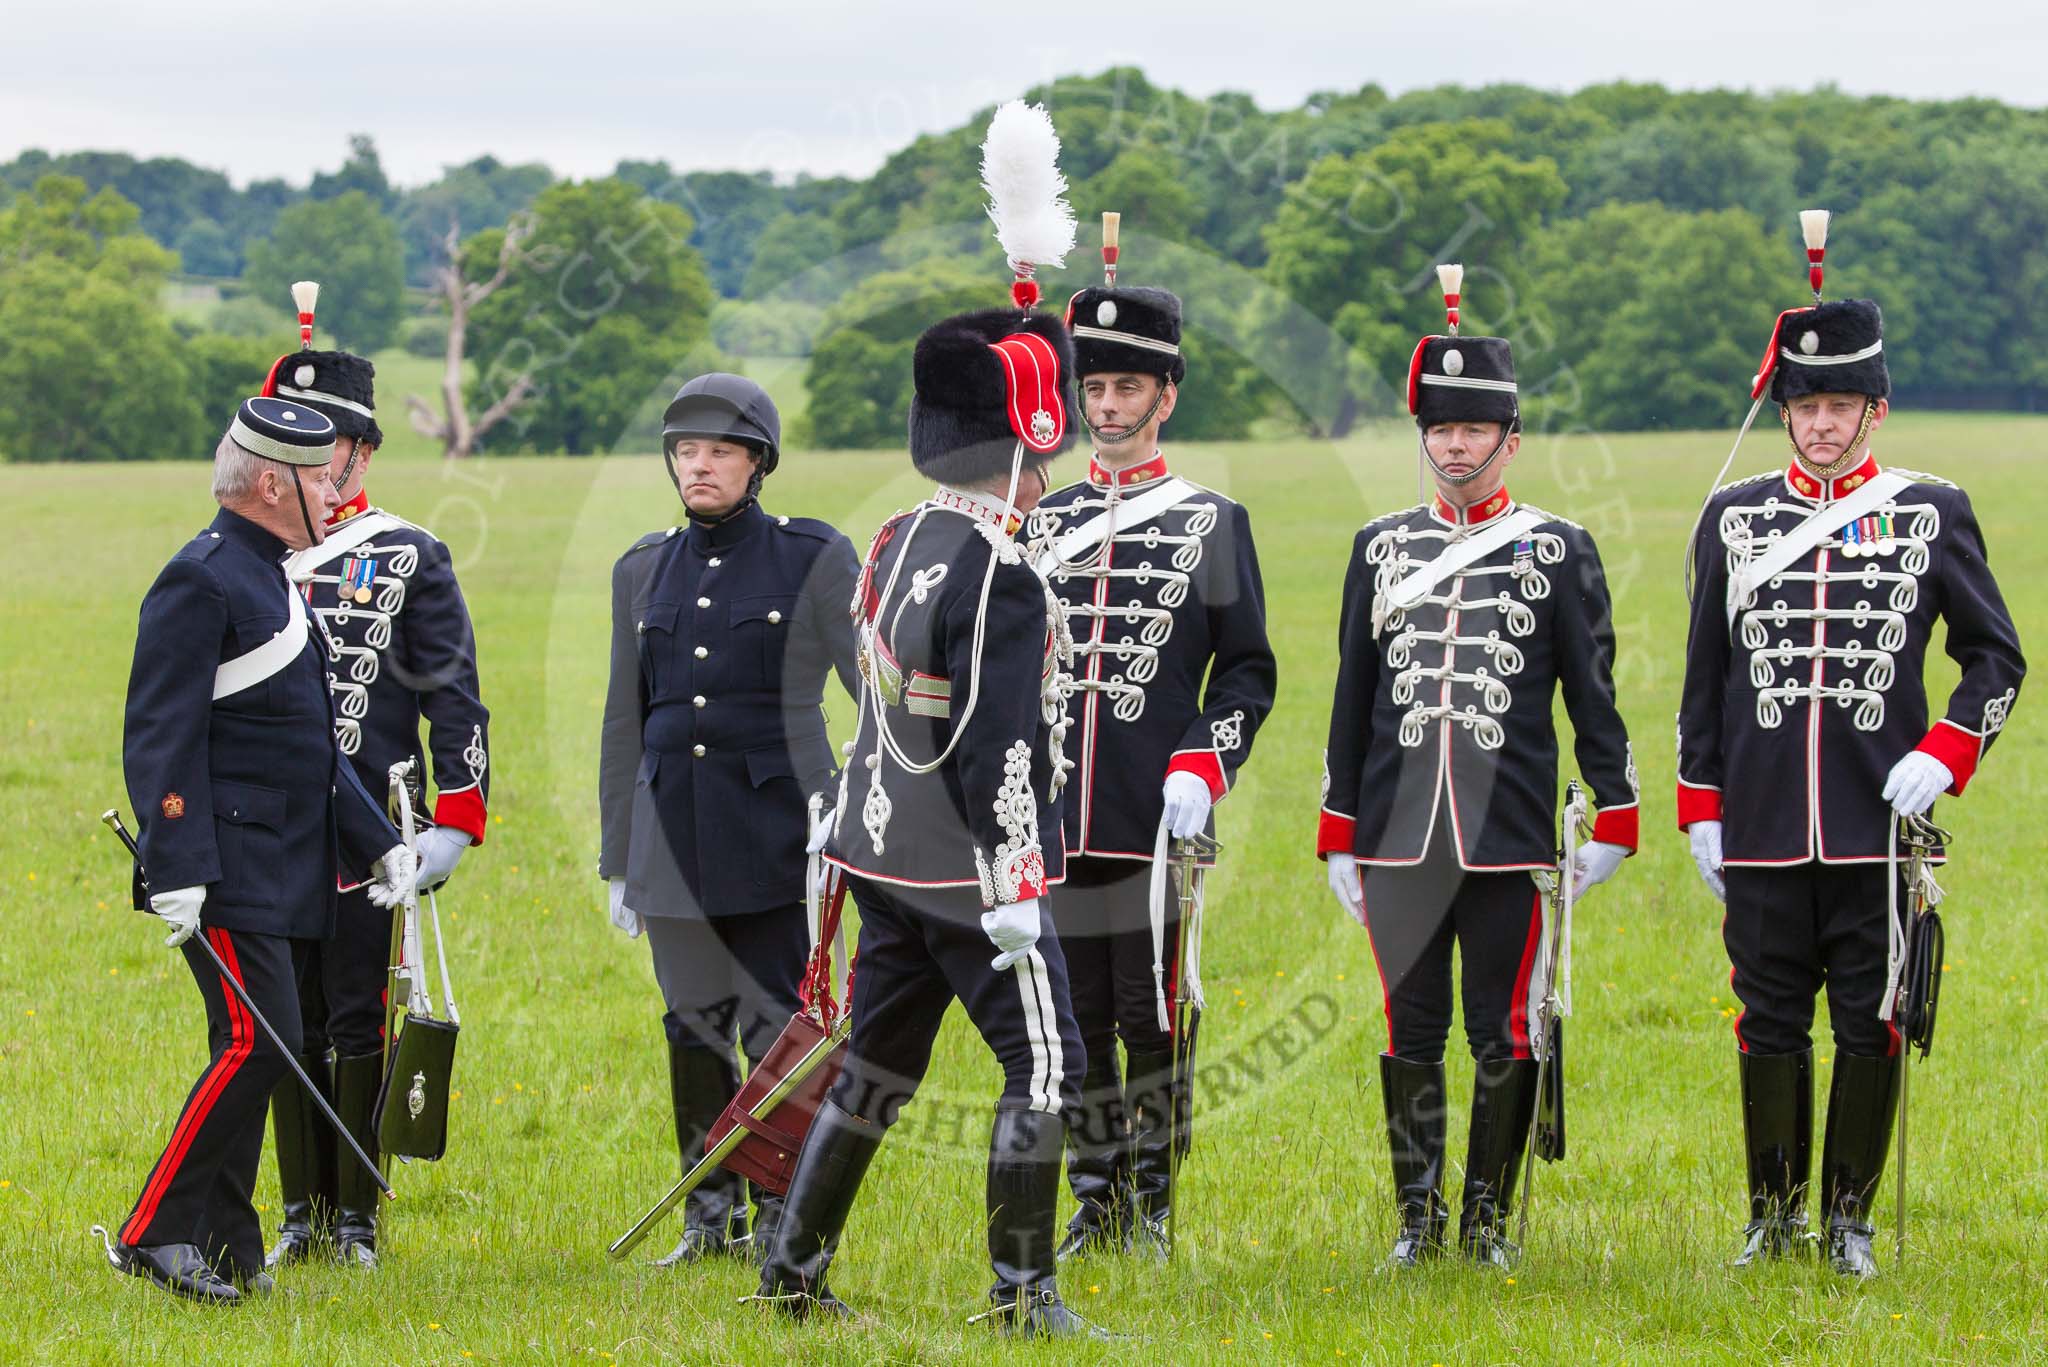 The Light Cavalry HAC Annual Review and Inspection 2013.
Windsor Great Park Review Ground,
Windsor,
Berkshire,
United Kingdom,
on 09 June 2013 at 12:30, image #175